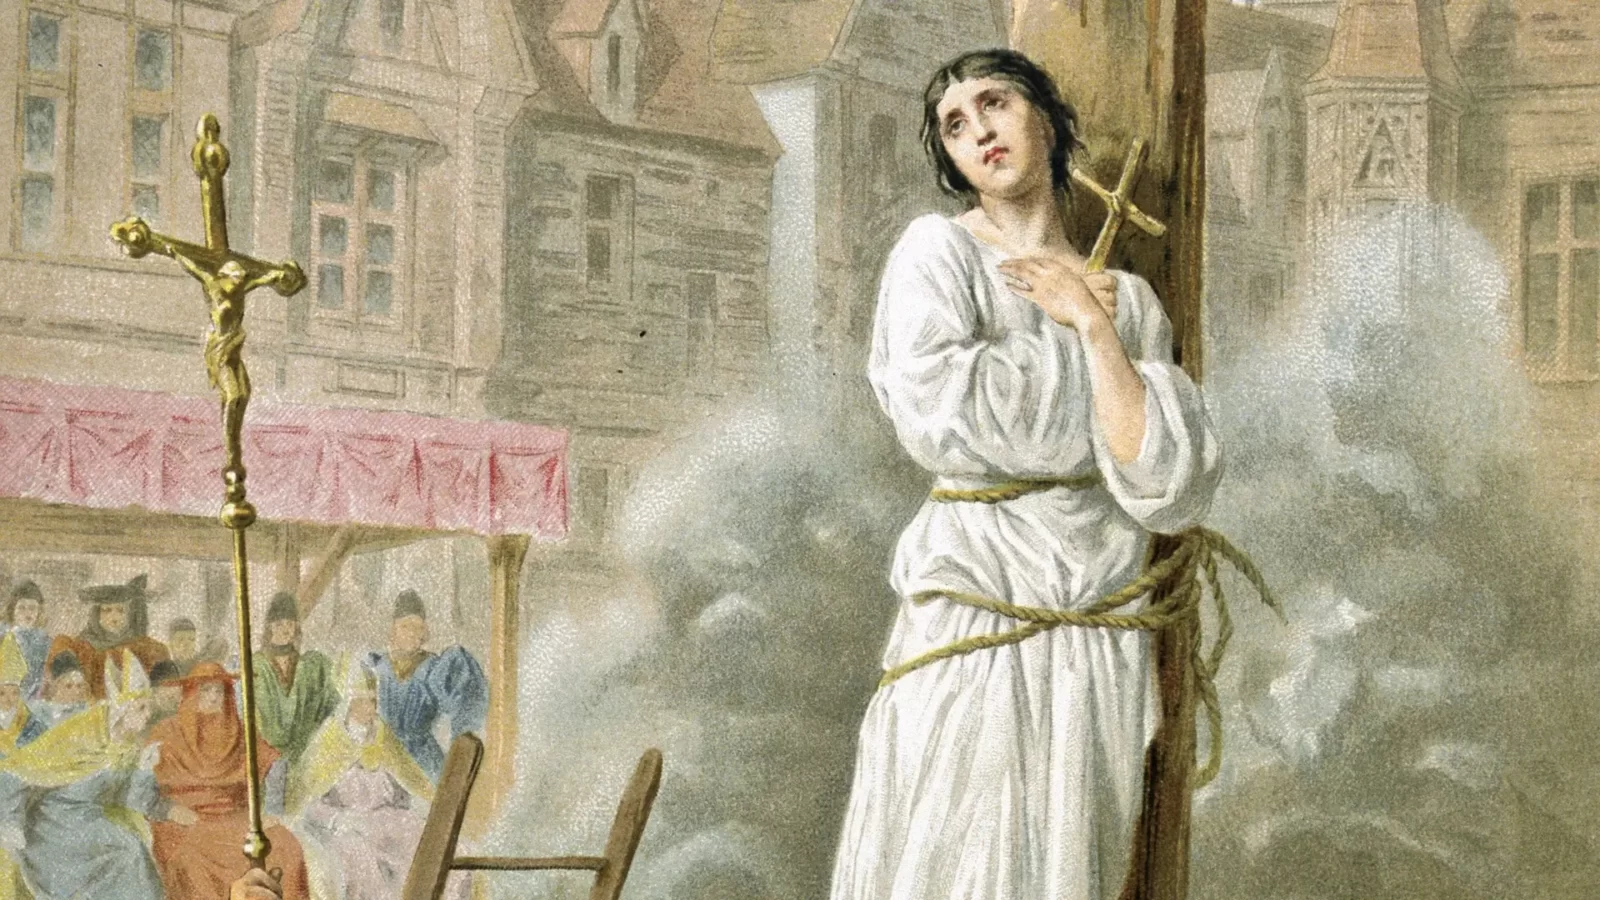 Joan of Arc burned at the stake